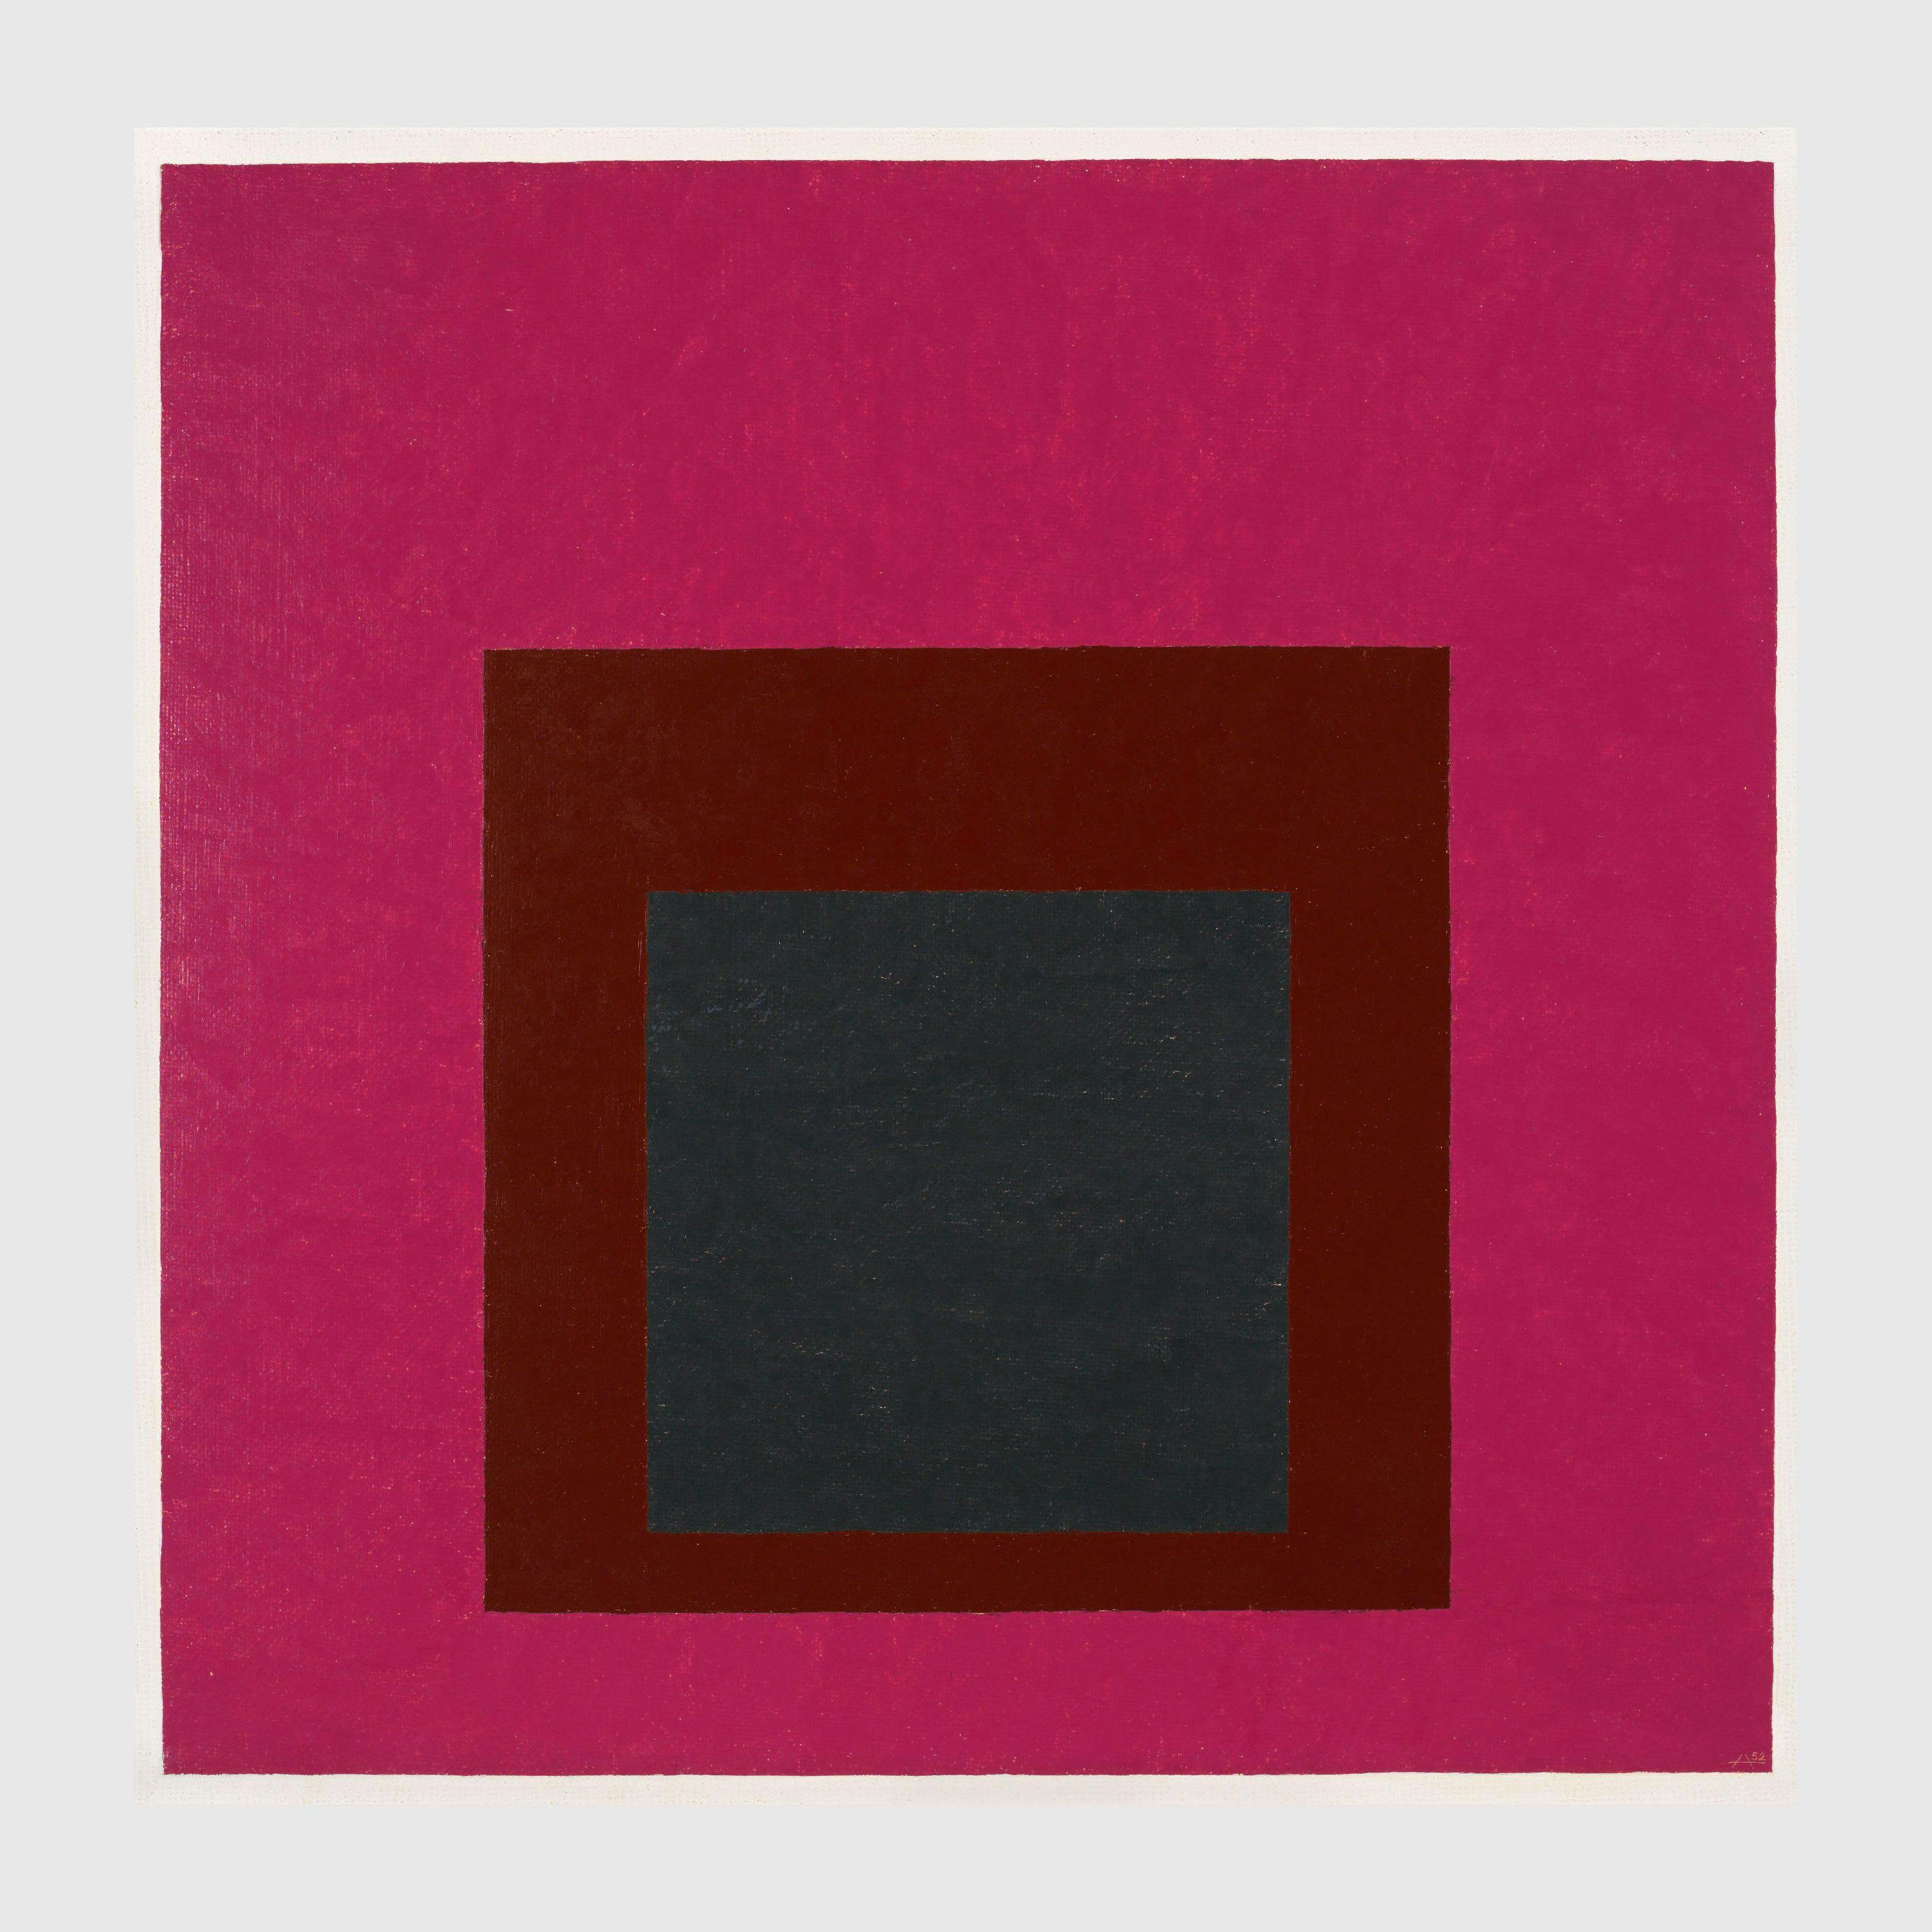 A painting by Josef Albers, titled Homage to the Square: Guarded, dated 1952.